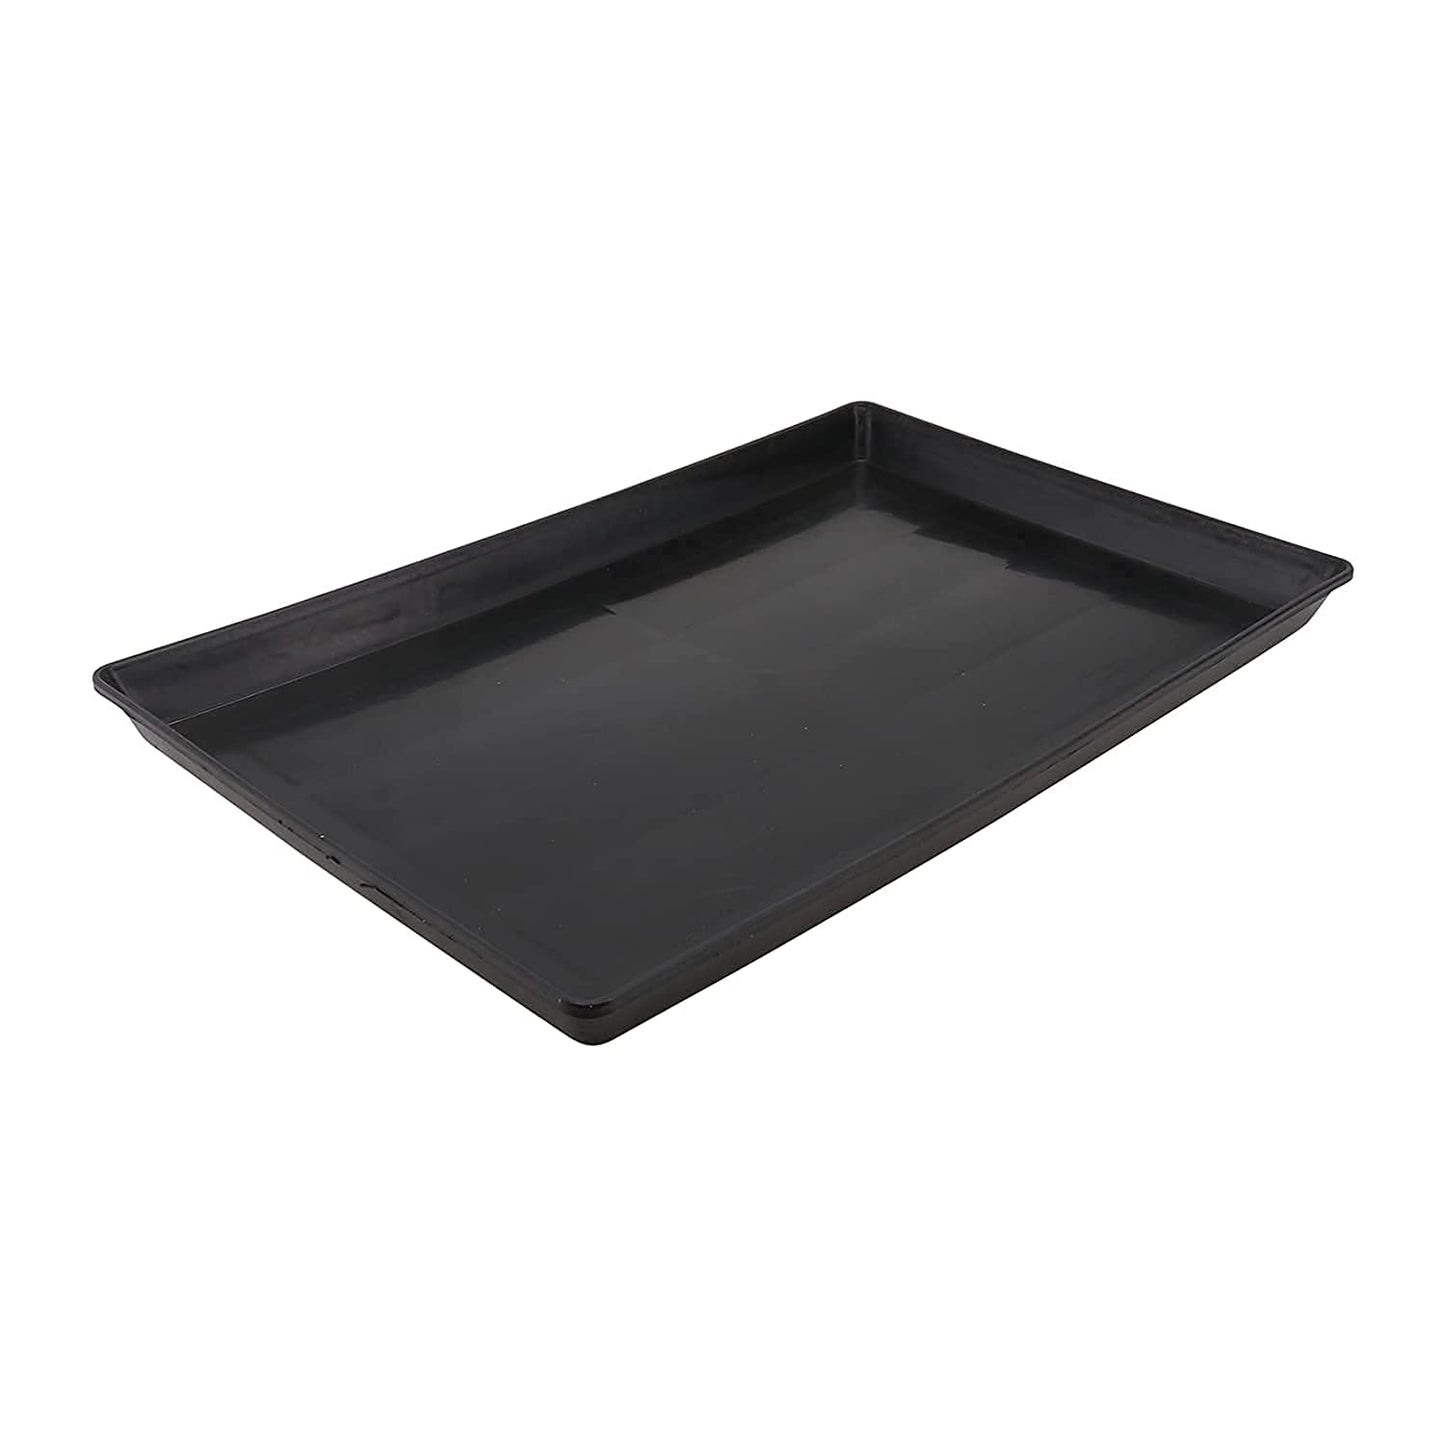 PetzLifeworld Birds Cage Black Tray for Easy Cleaning (2 Feet * 1.5 Feet)